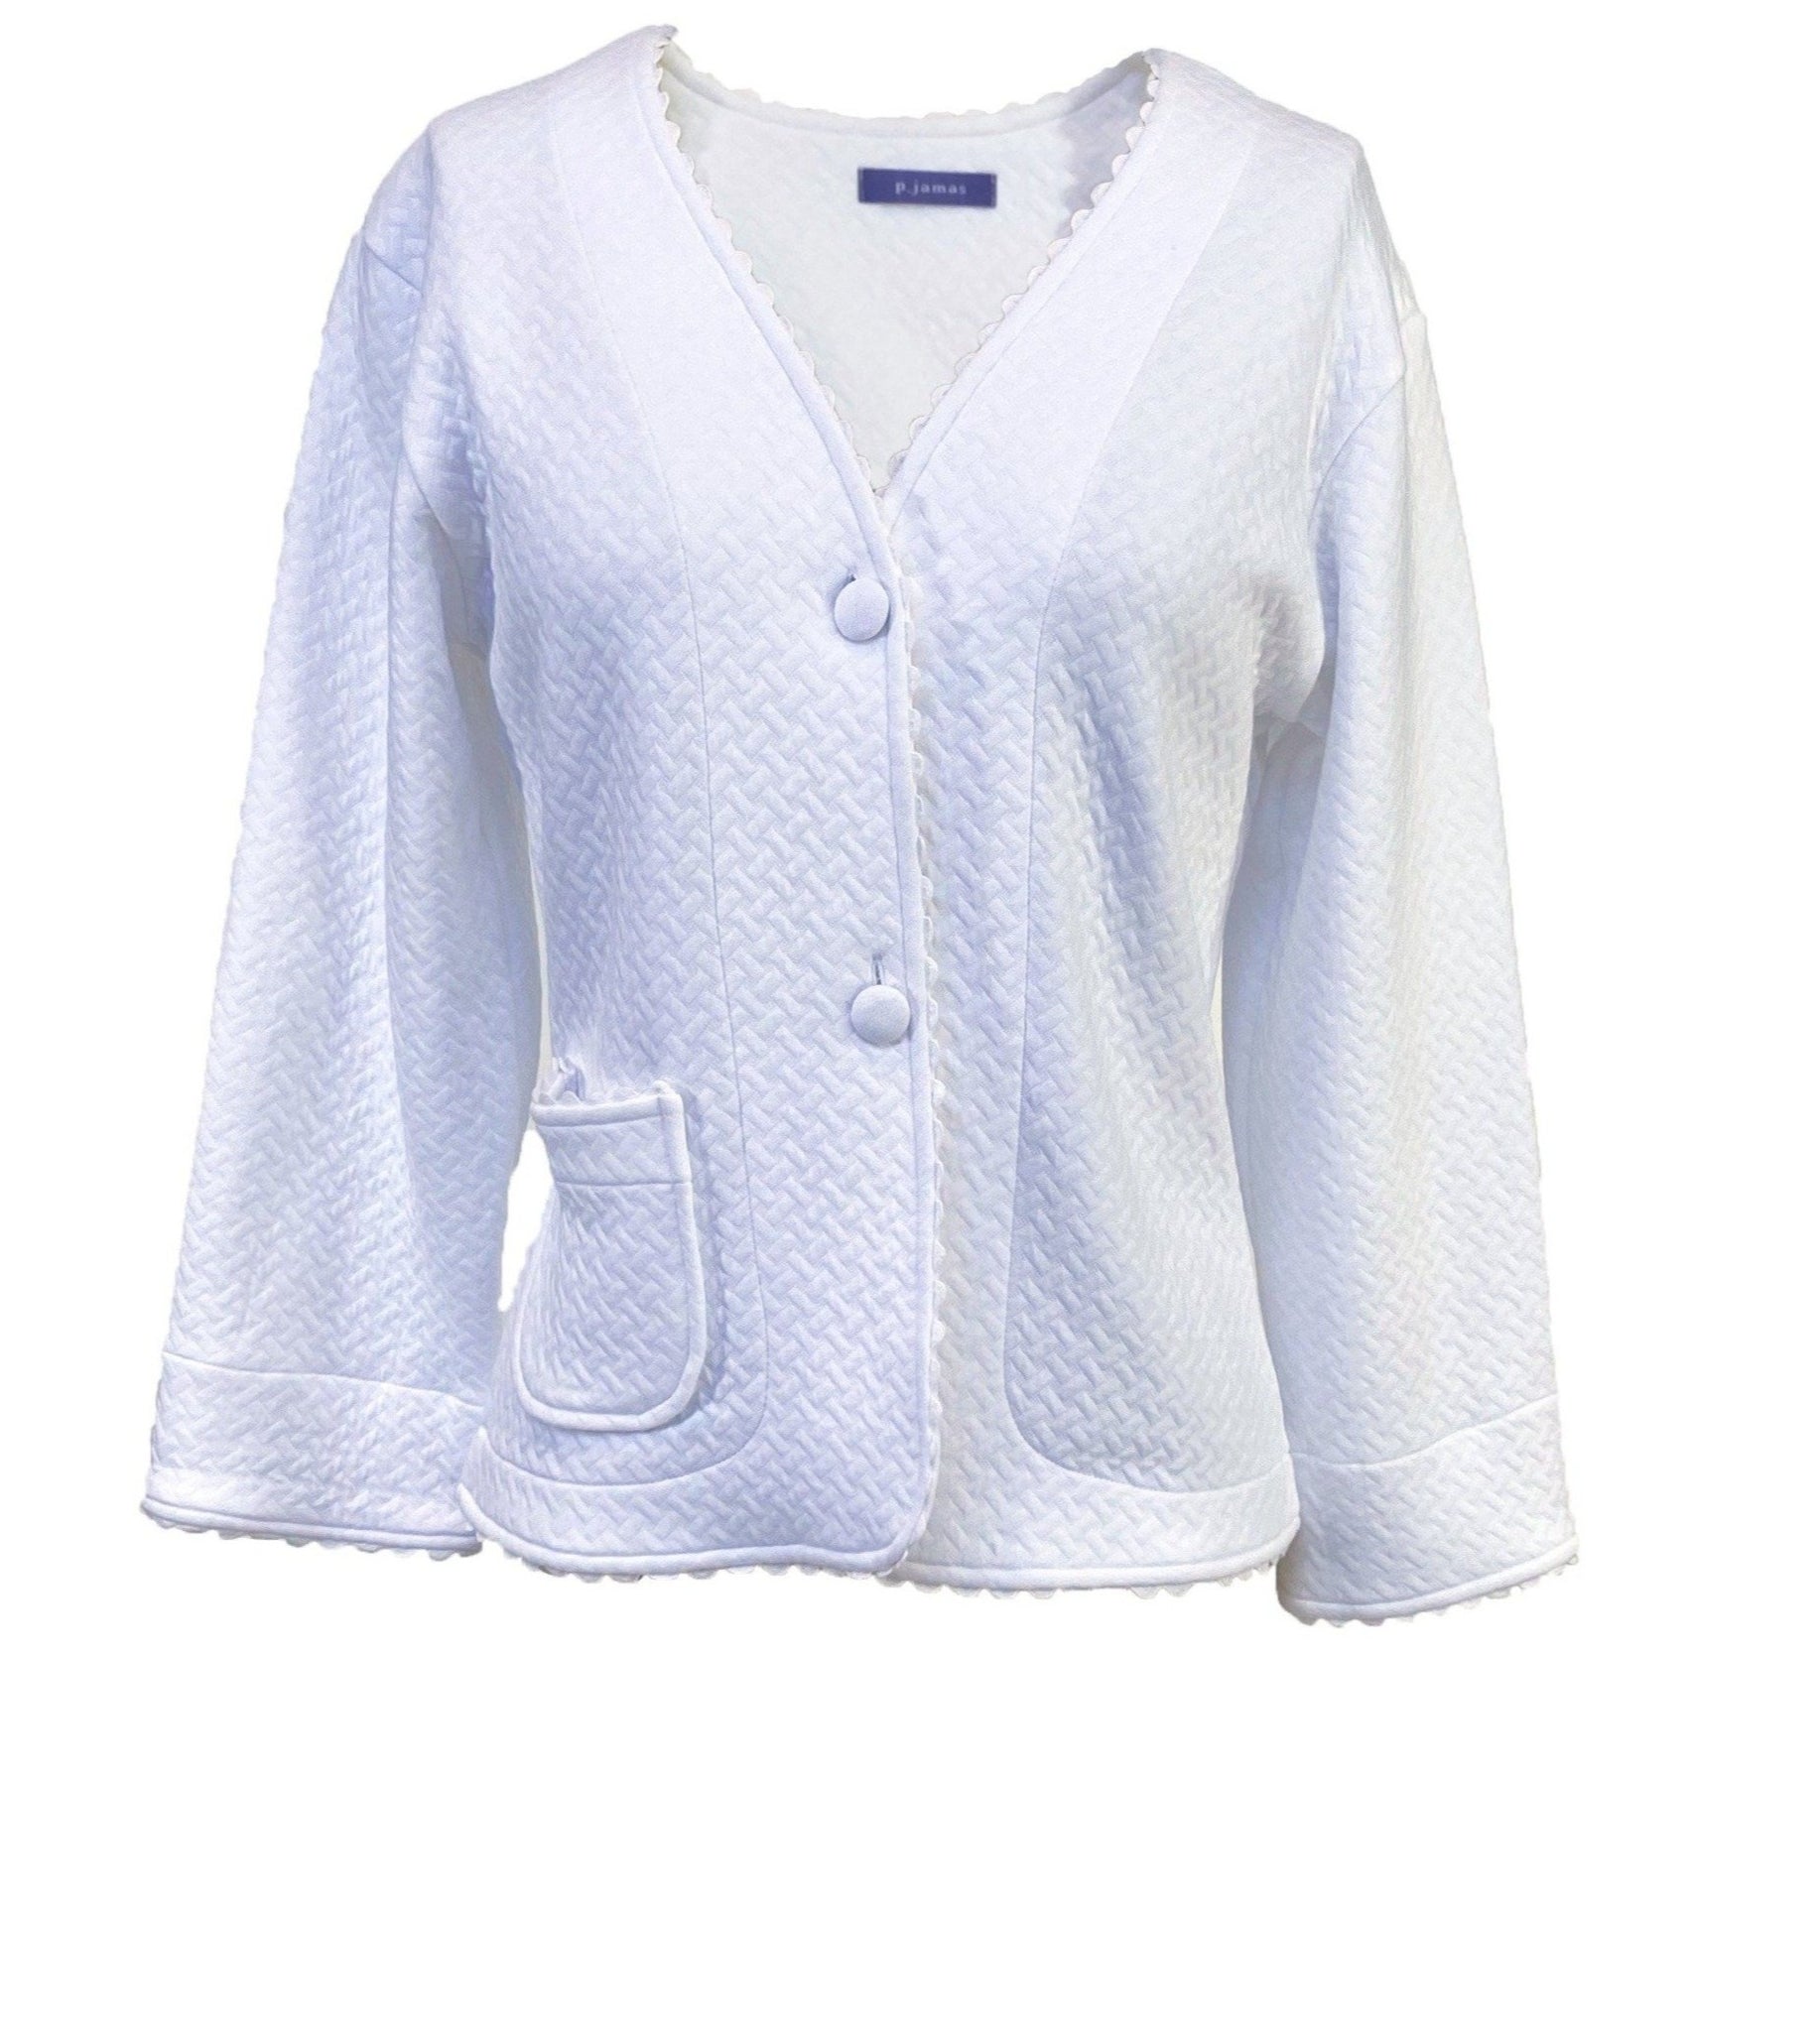 Quilted Basketweave Bed Jacket in White